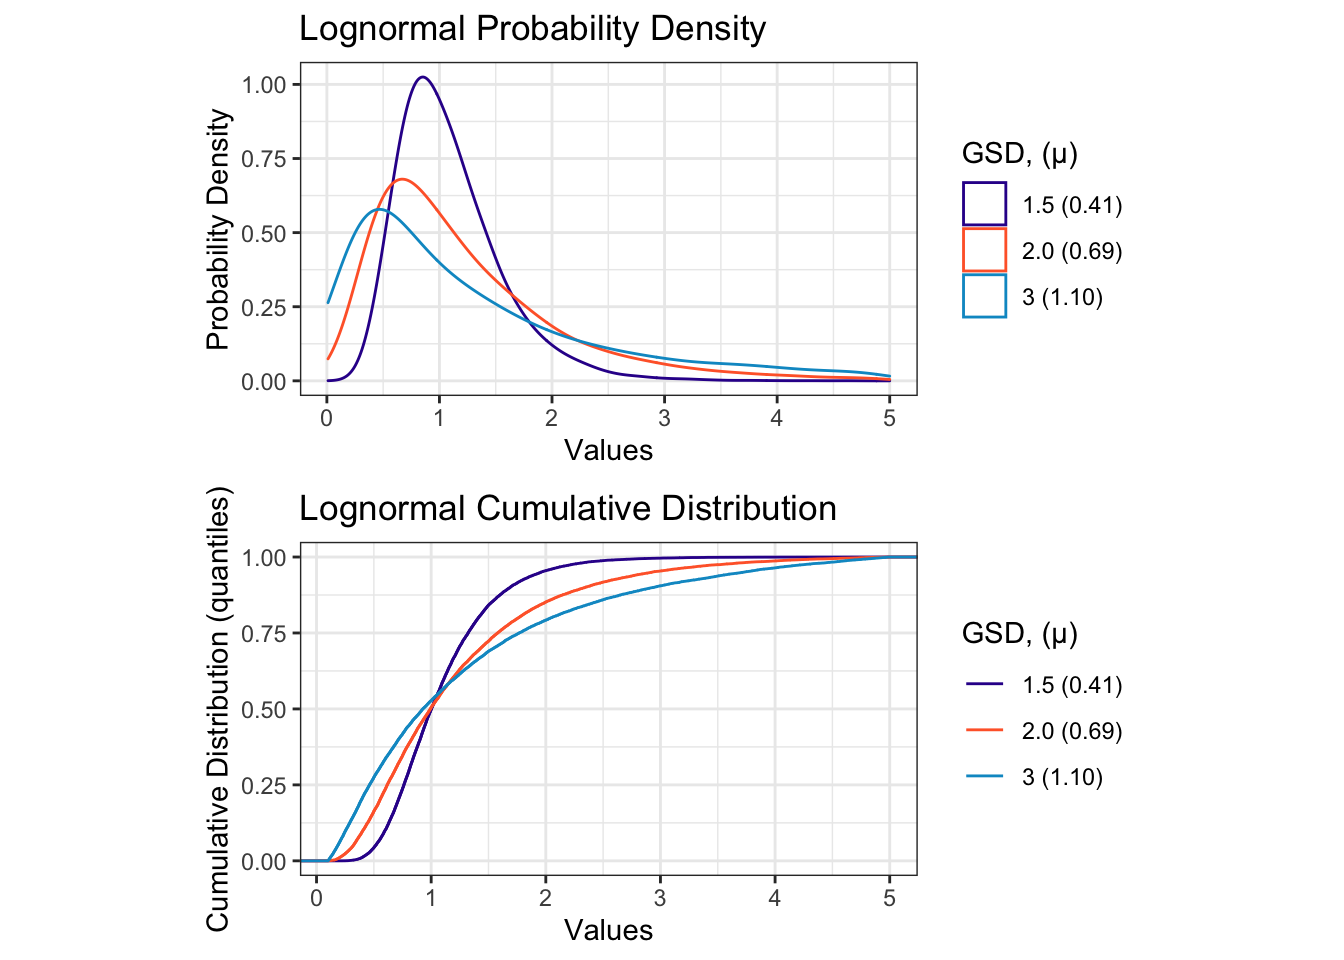 Characteristic Plots for a Series of Lognormal Distributions of Varying GSD